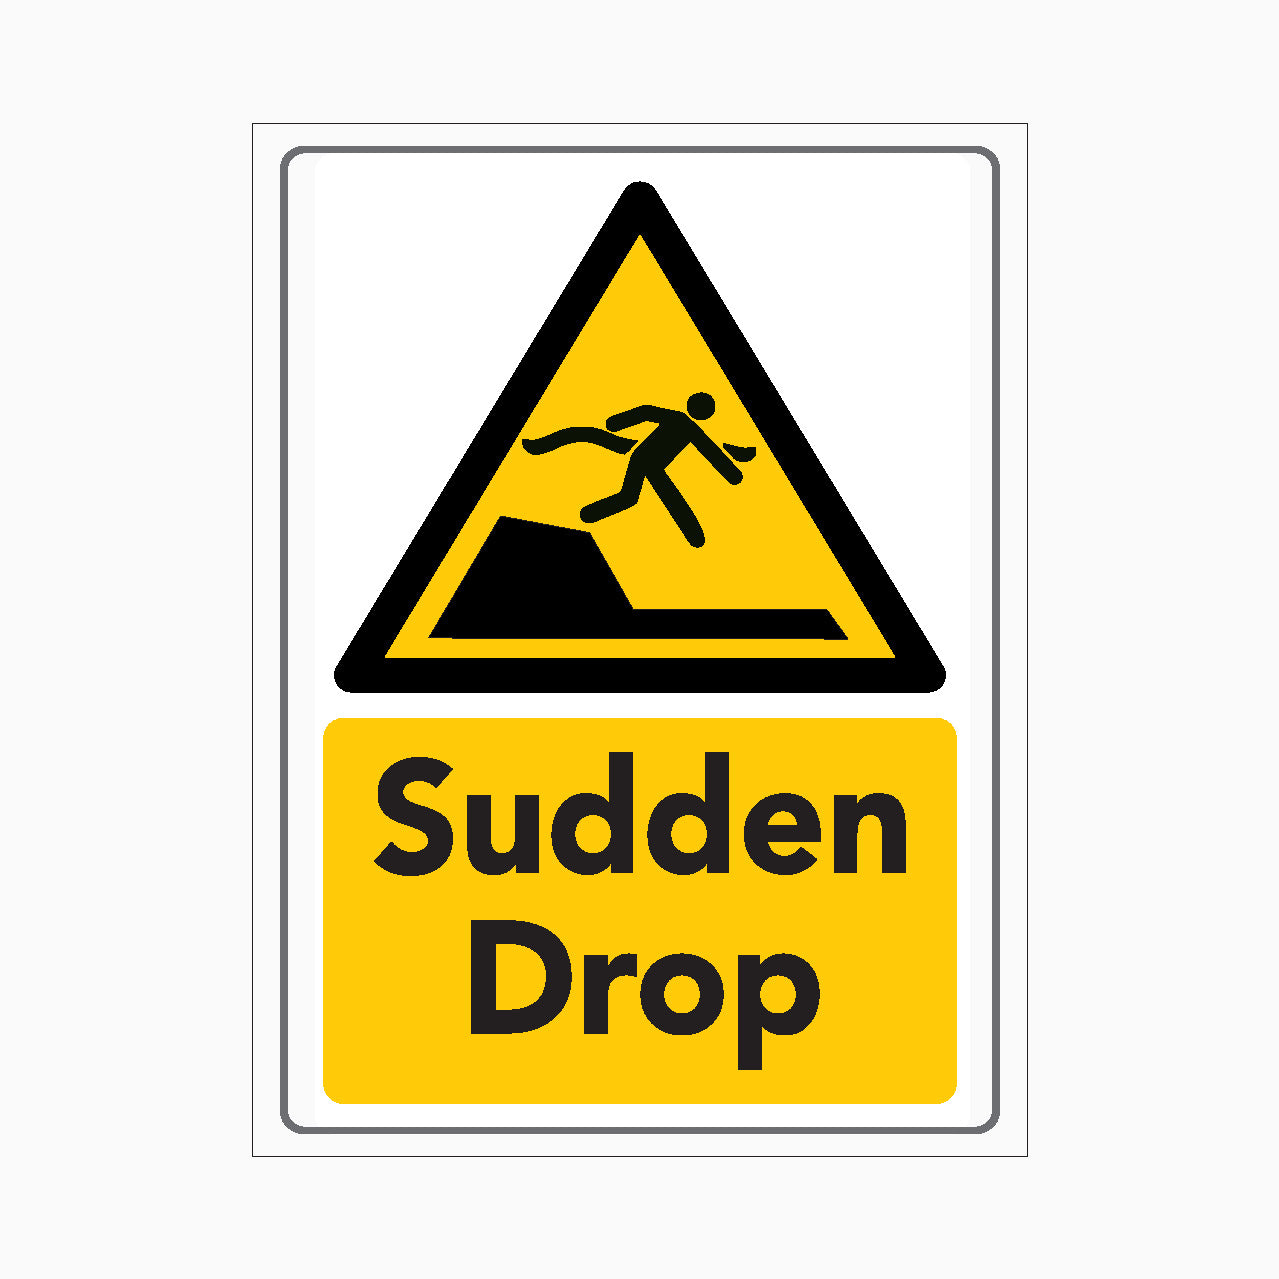 SUDDEN DROP SIGN - SAFETY SIGN